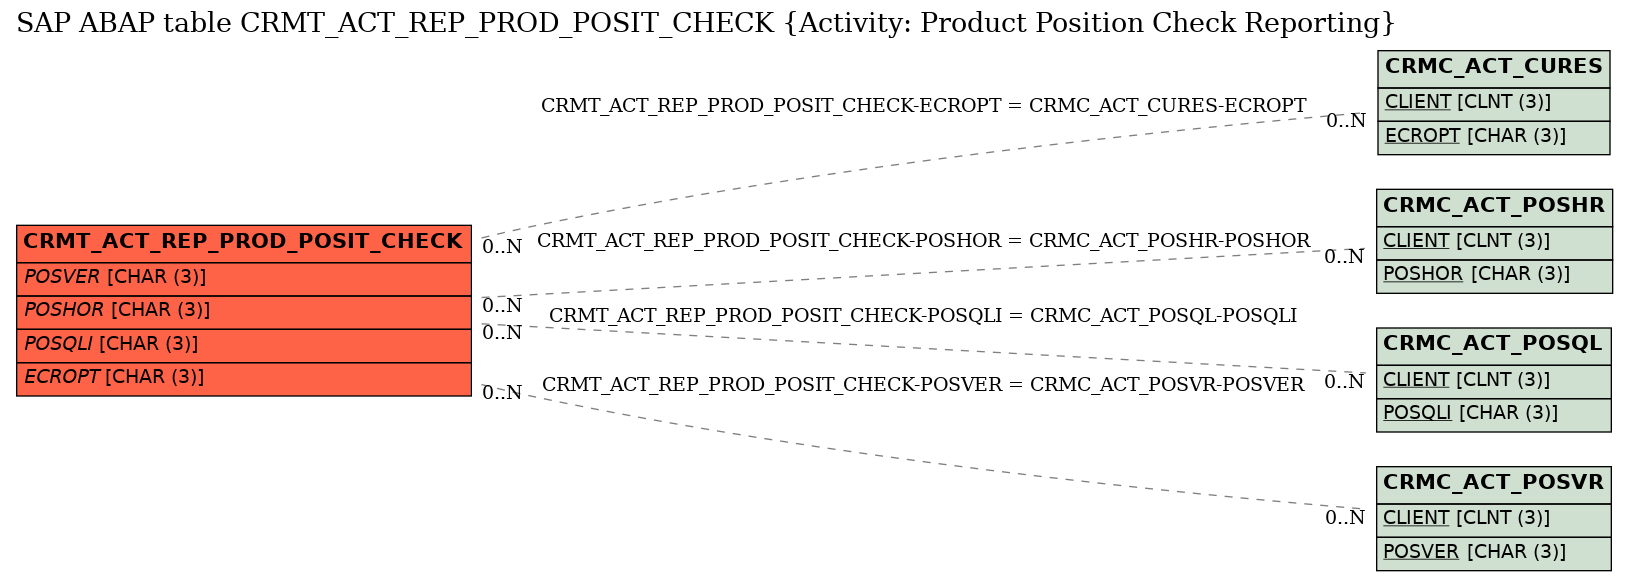 E-R Diagram for table CRMT_ACT_REP_PROD_POSIT_CHECK (Activity: Product Position Check Reporting)